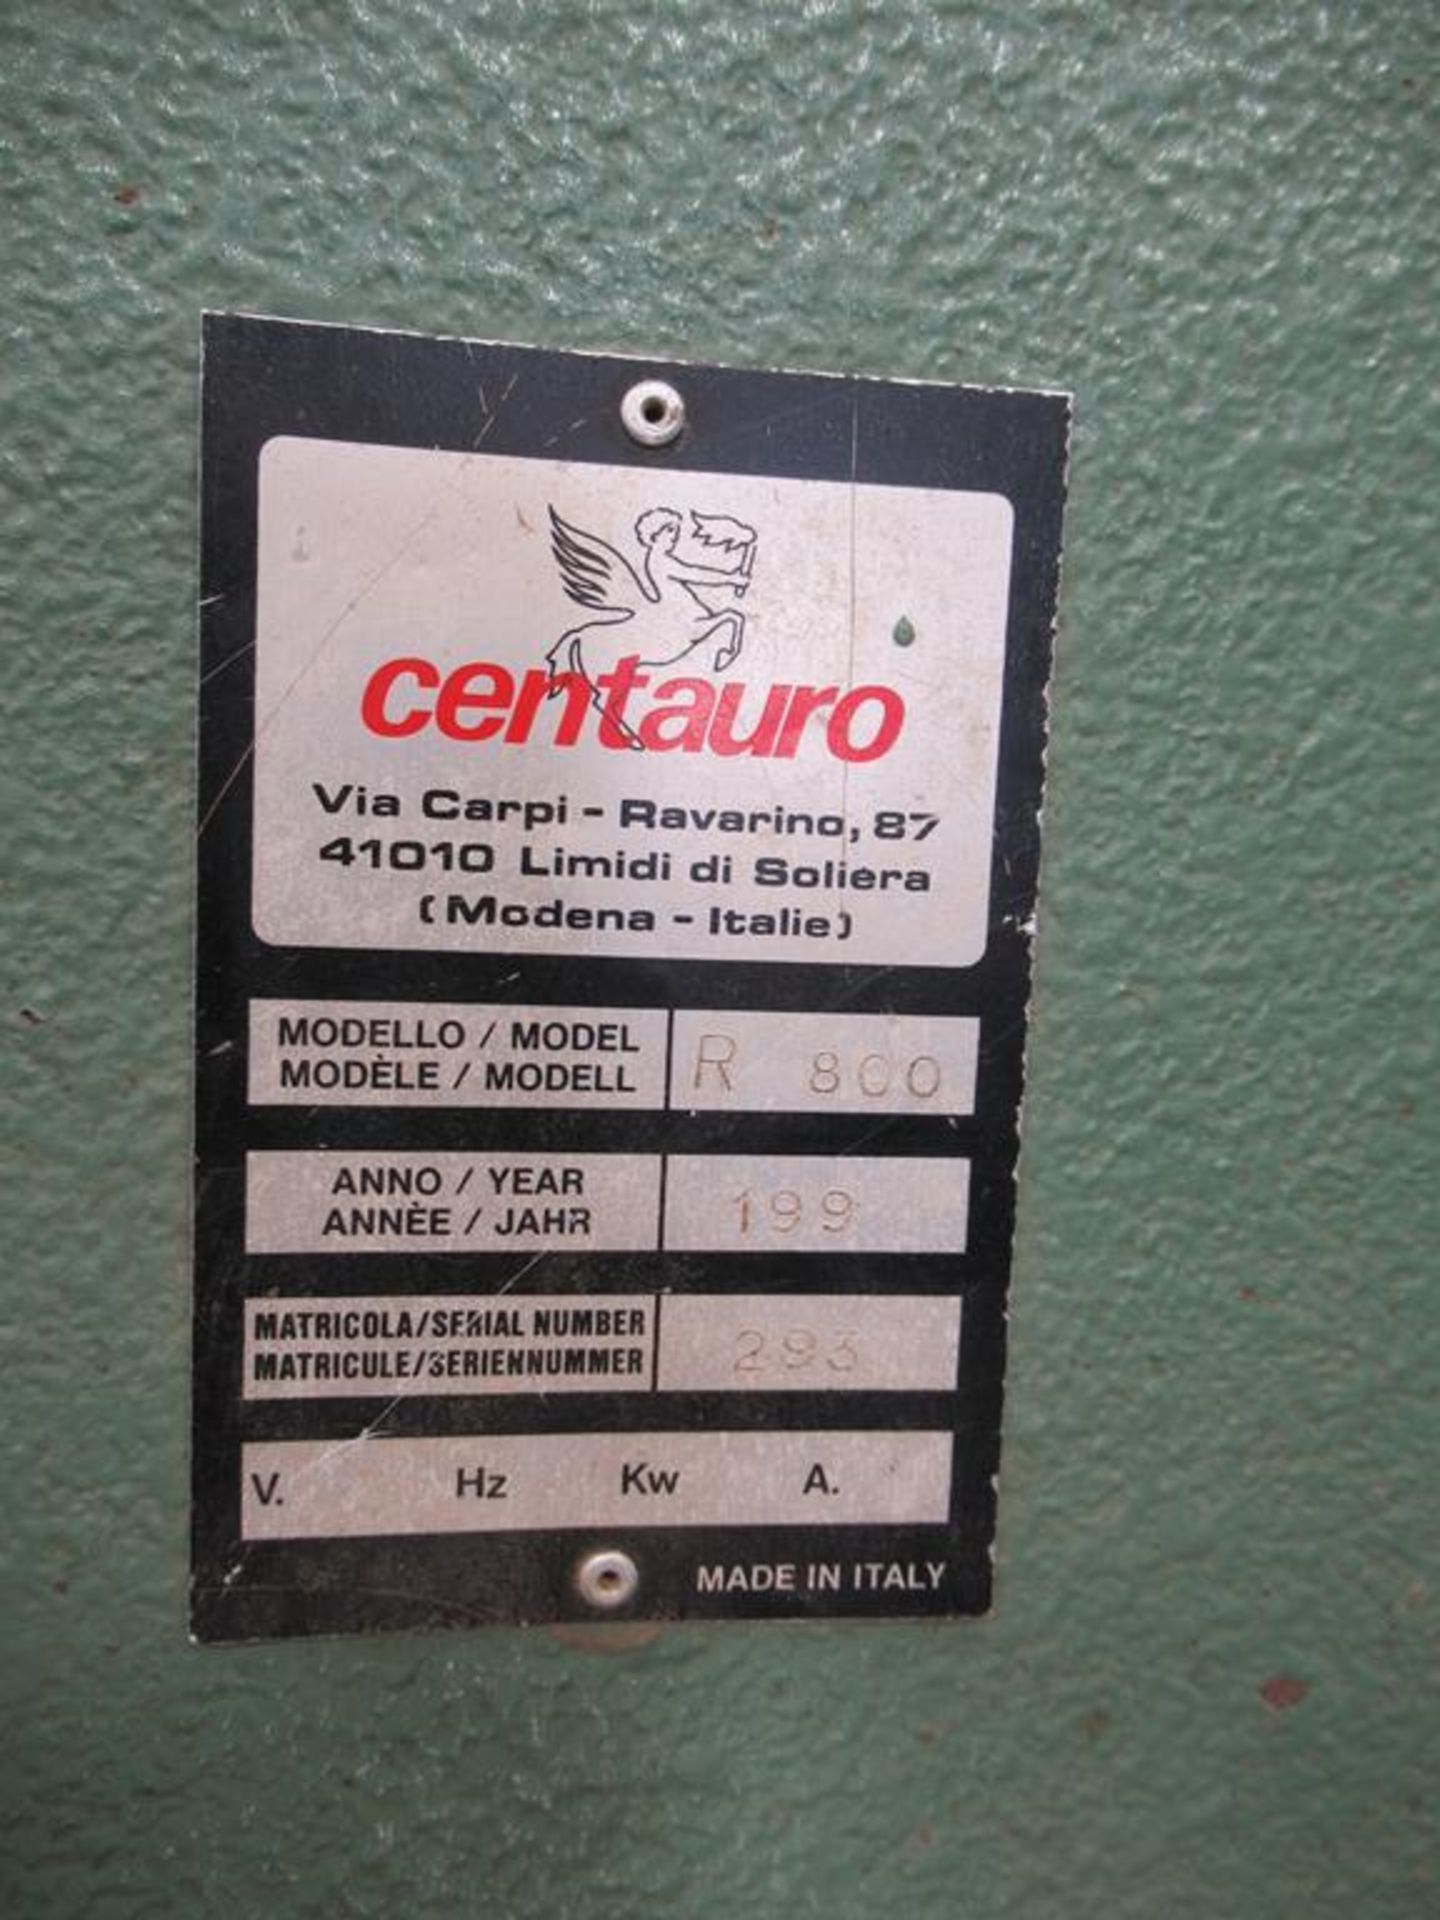 Centauro R 800 Industrial Bandsaw - Image 7 of 7